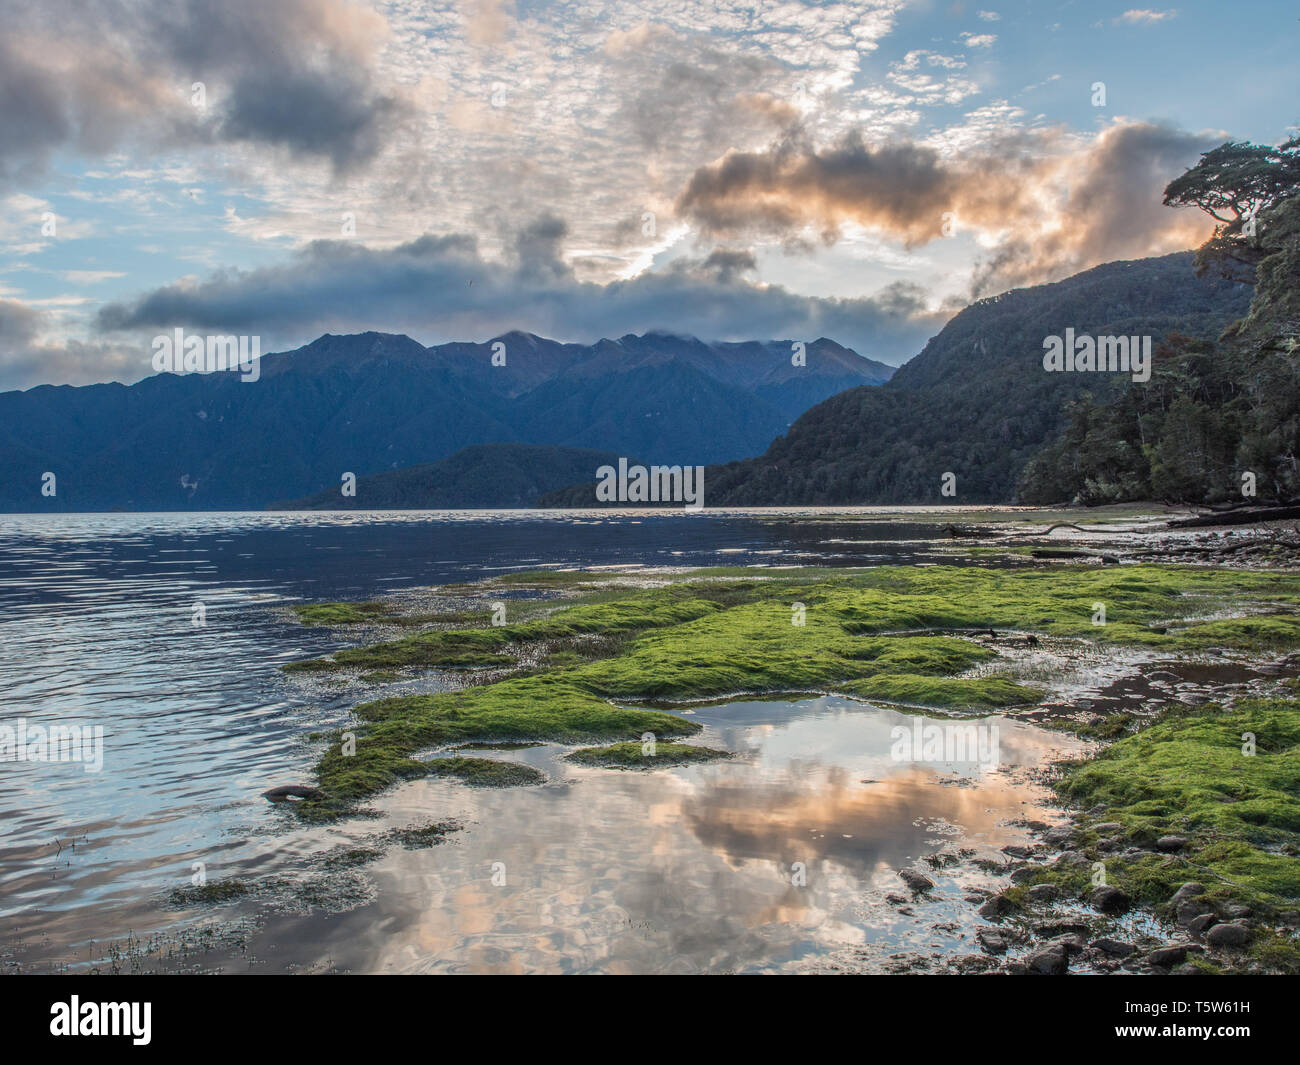 Green plants, clouds reflected in clear calm water, dark mountains rise in the distance, Lake Hauroko, Fiordland National Park, Southland, New Zealand Stock Photo